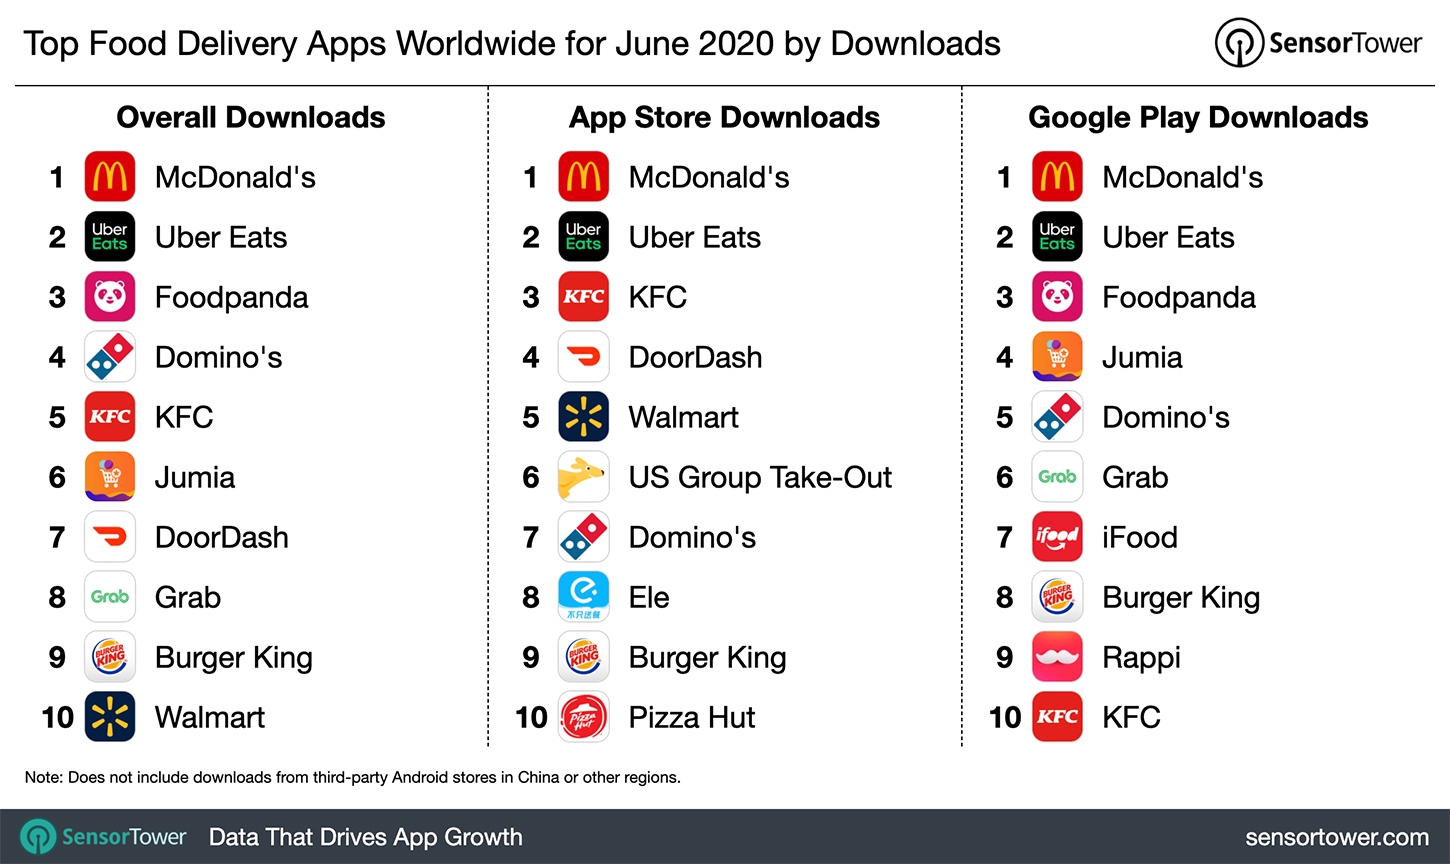 Top Food Delivery Apps Worldwide for June 2020 by Downloads